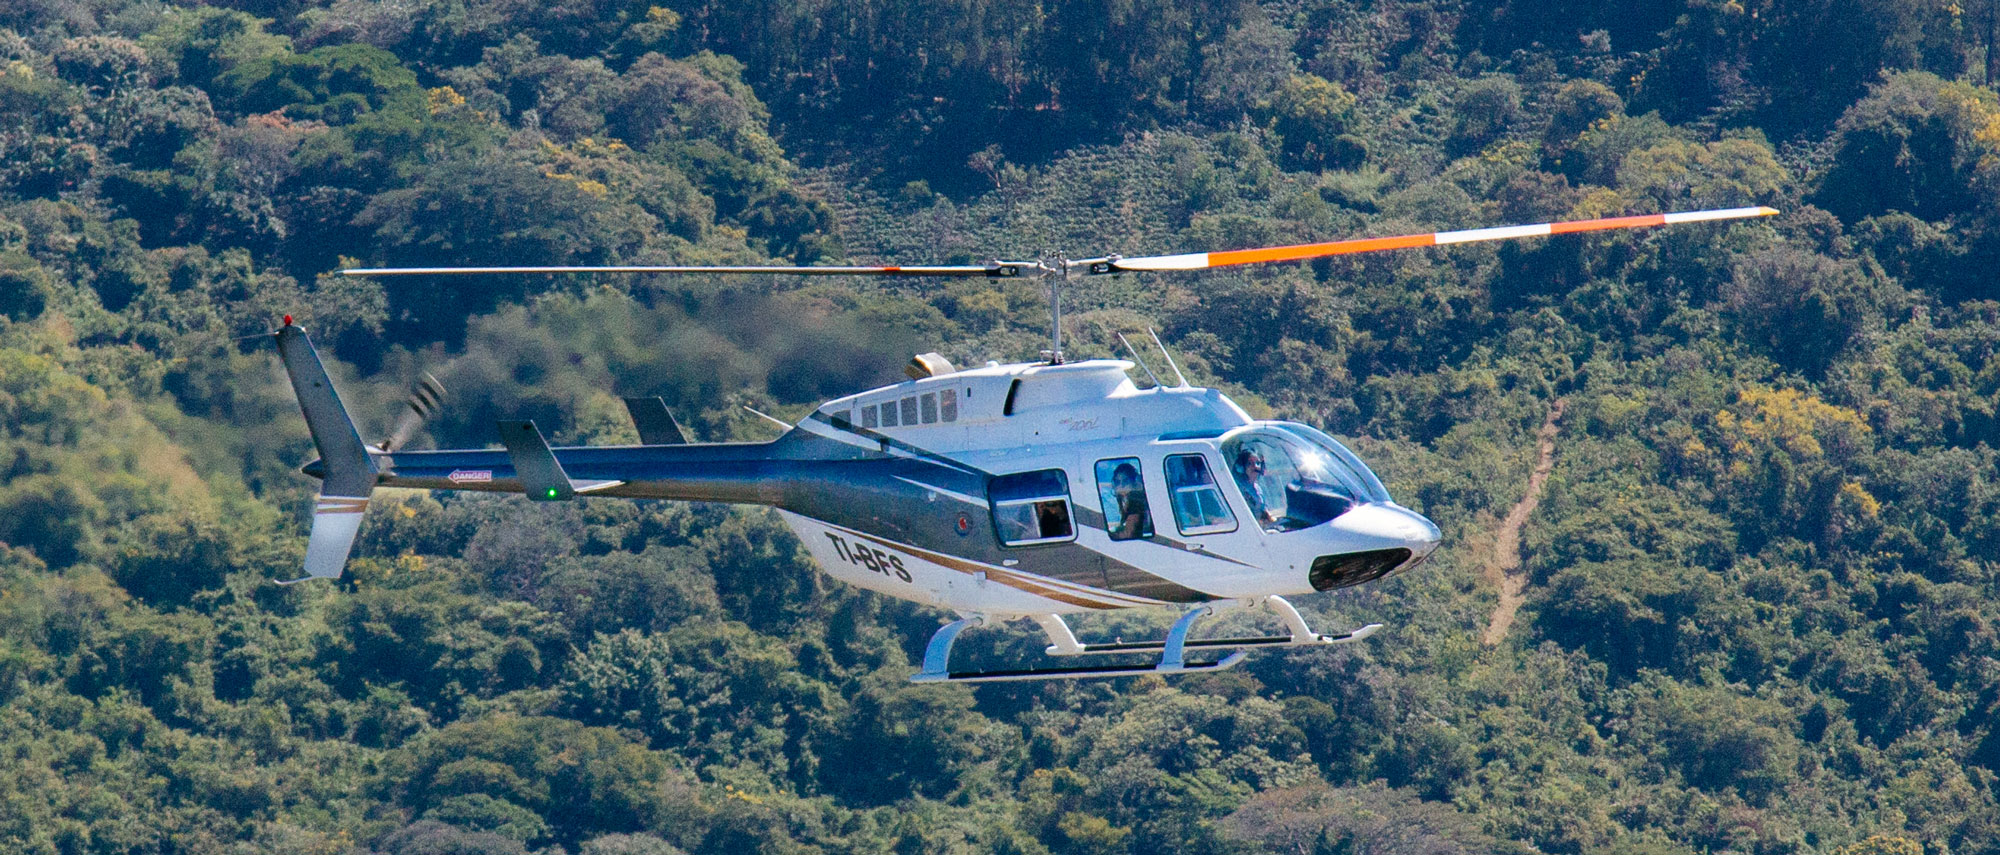 Costa Rica helicopter tour